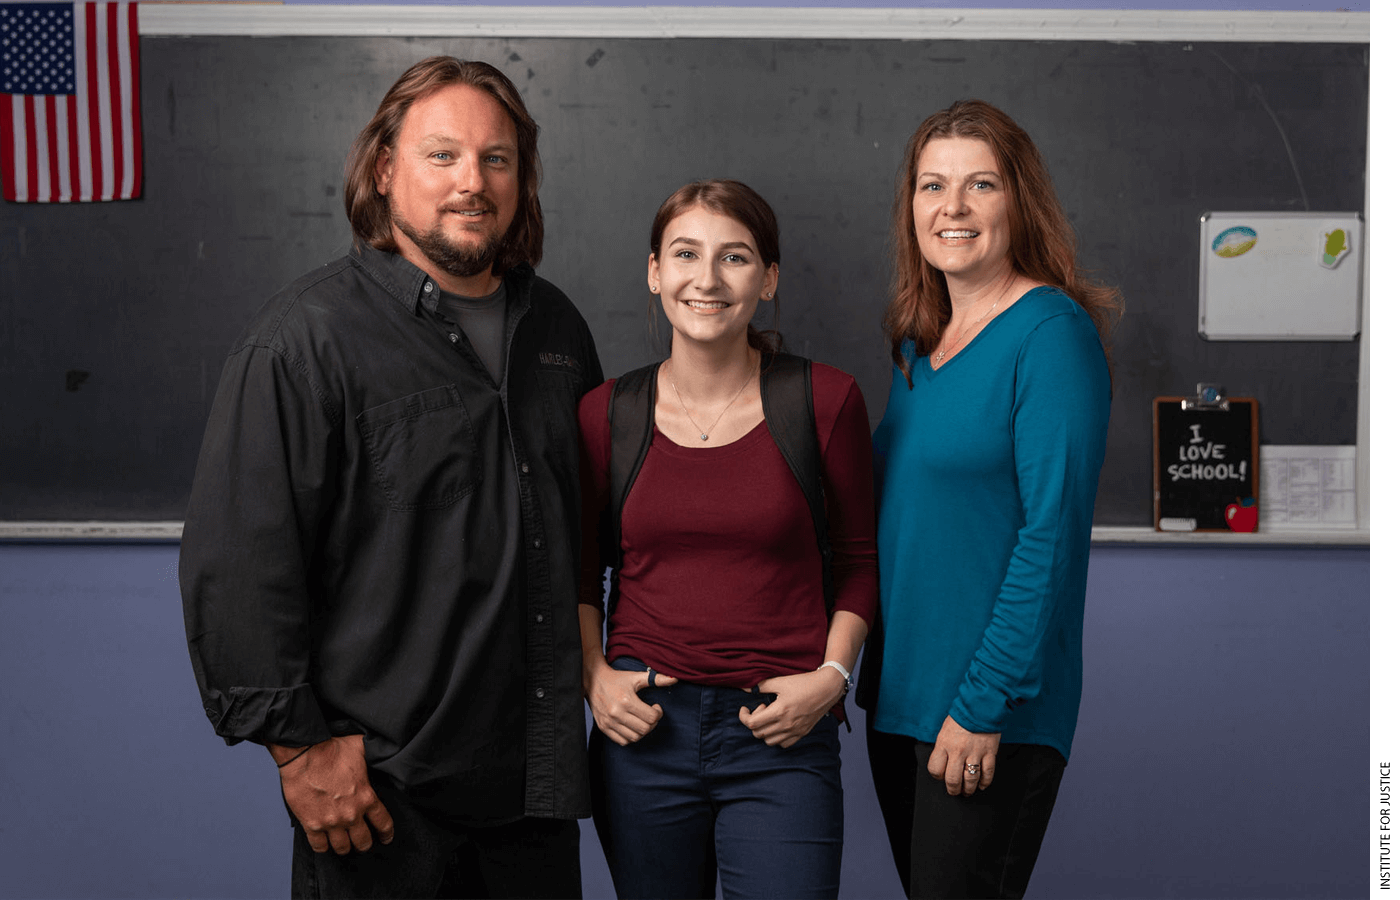 Plaintiffs Dave and Amy Carson received no tuition assistance from the town of Glenburn, Maine, for their daughter Olivia to attend Bangor Christian Schools.